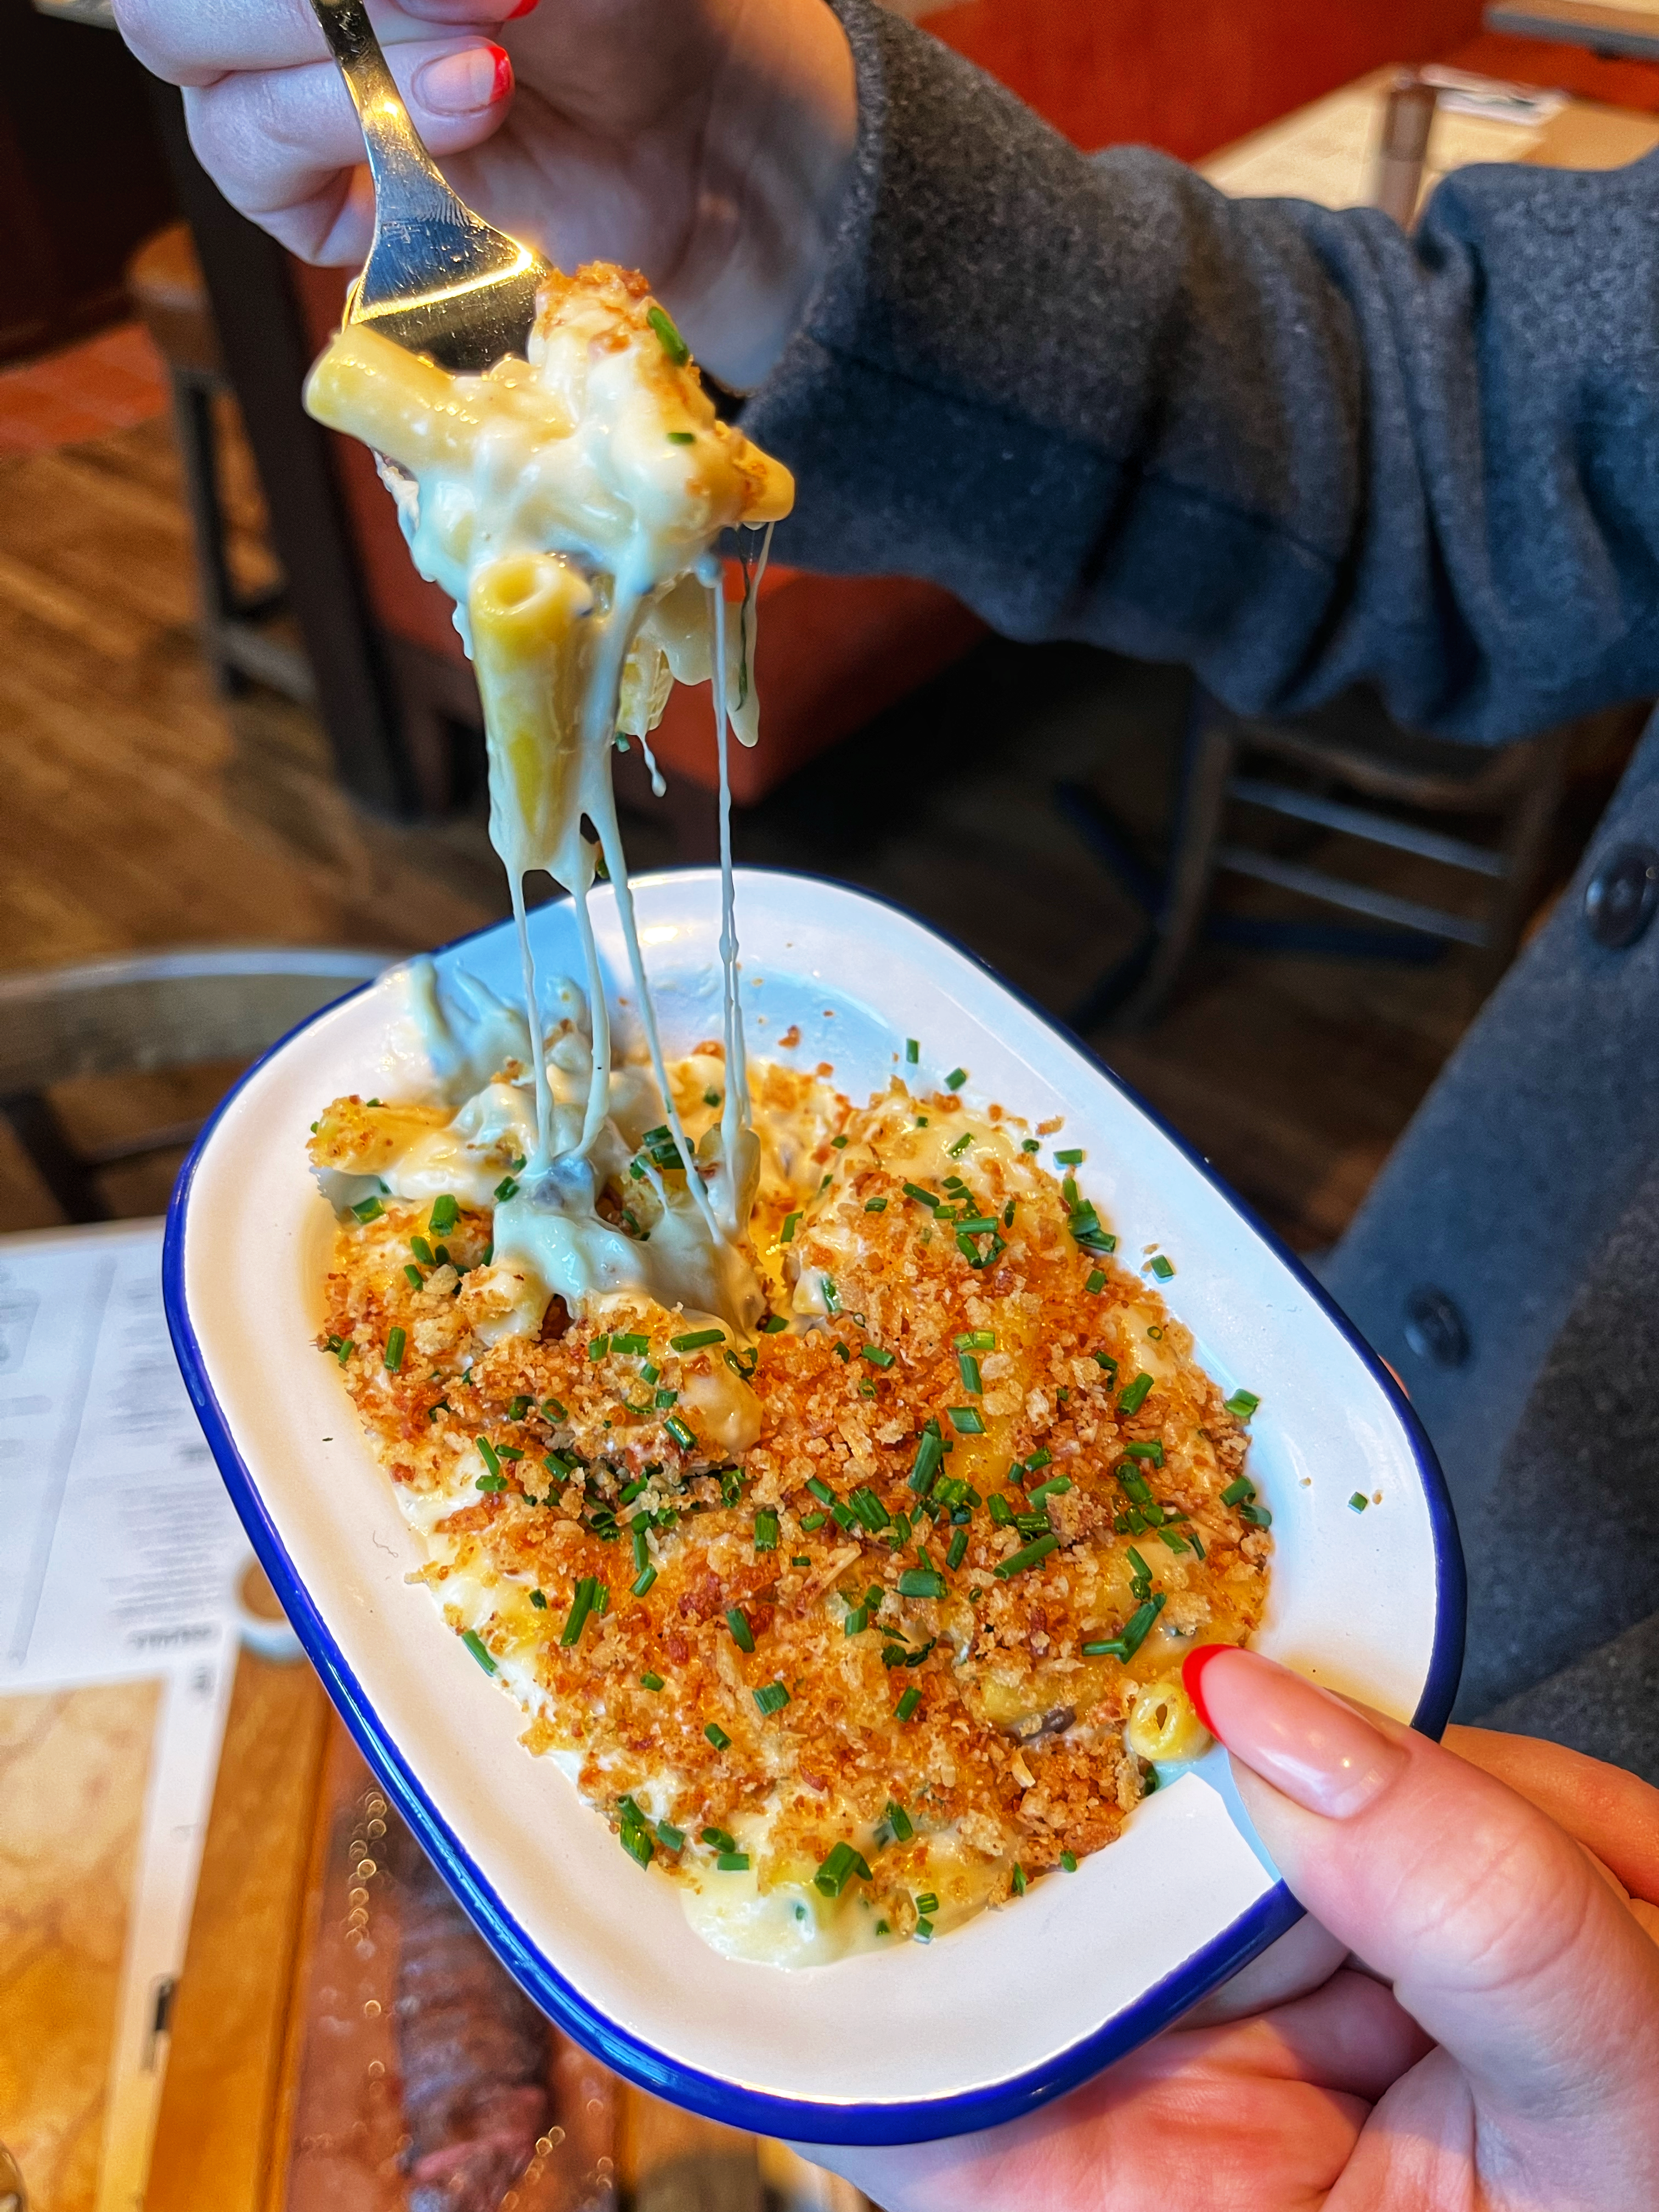 Flat Iron sides include mac and cheese. Credit: The Hoot Leeds